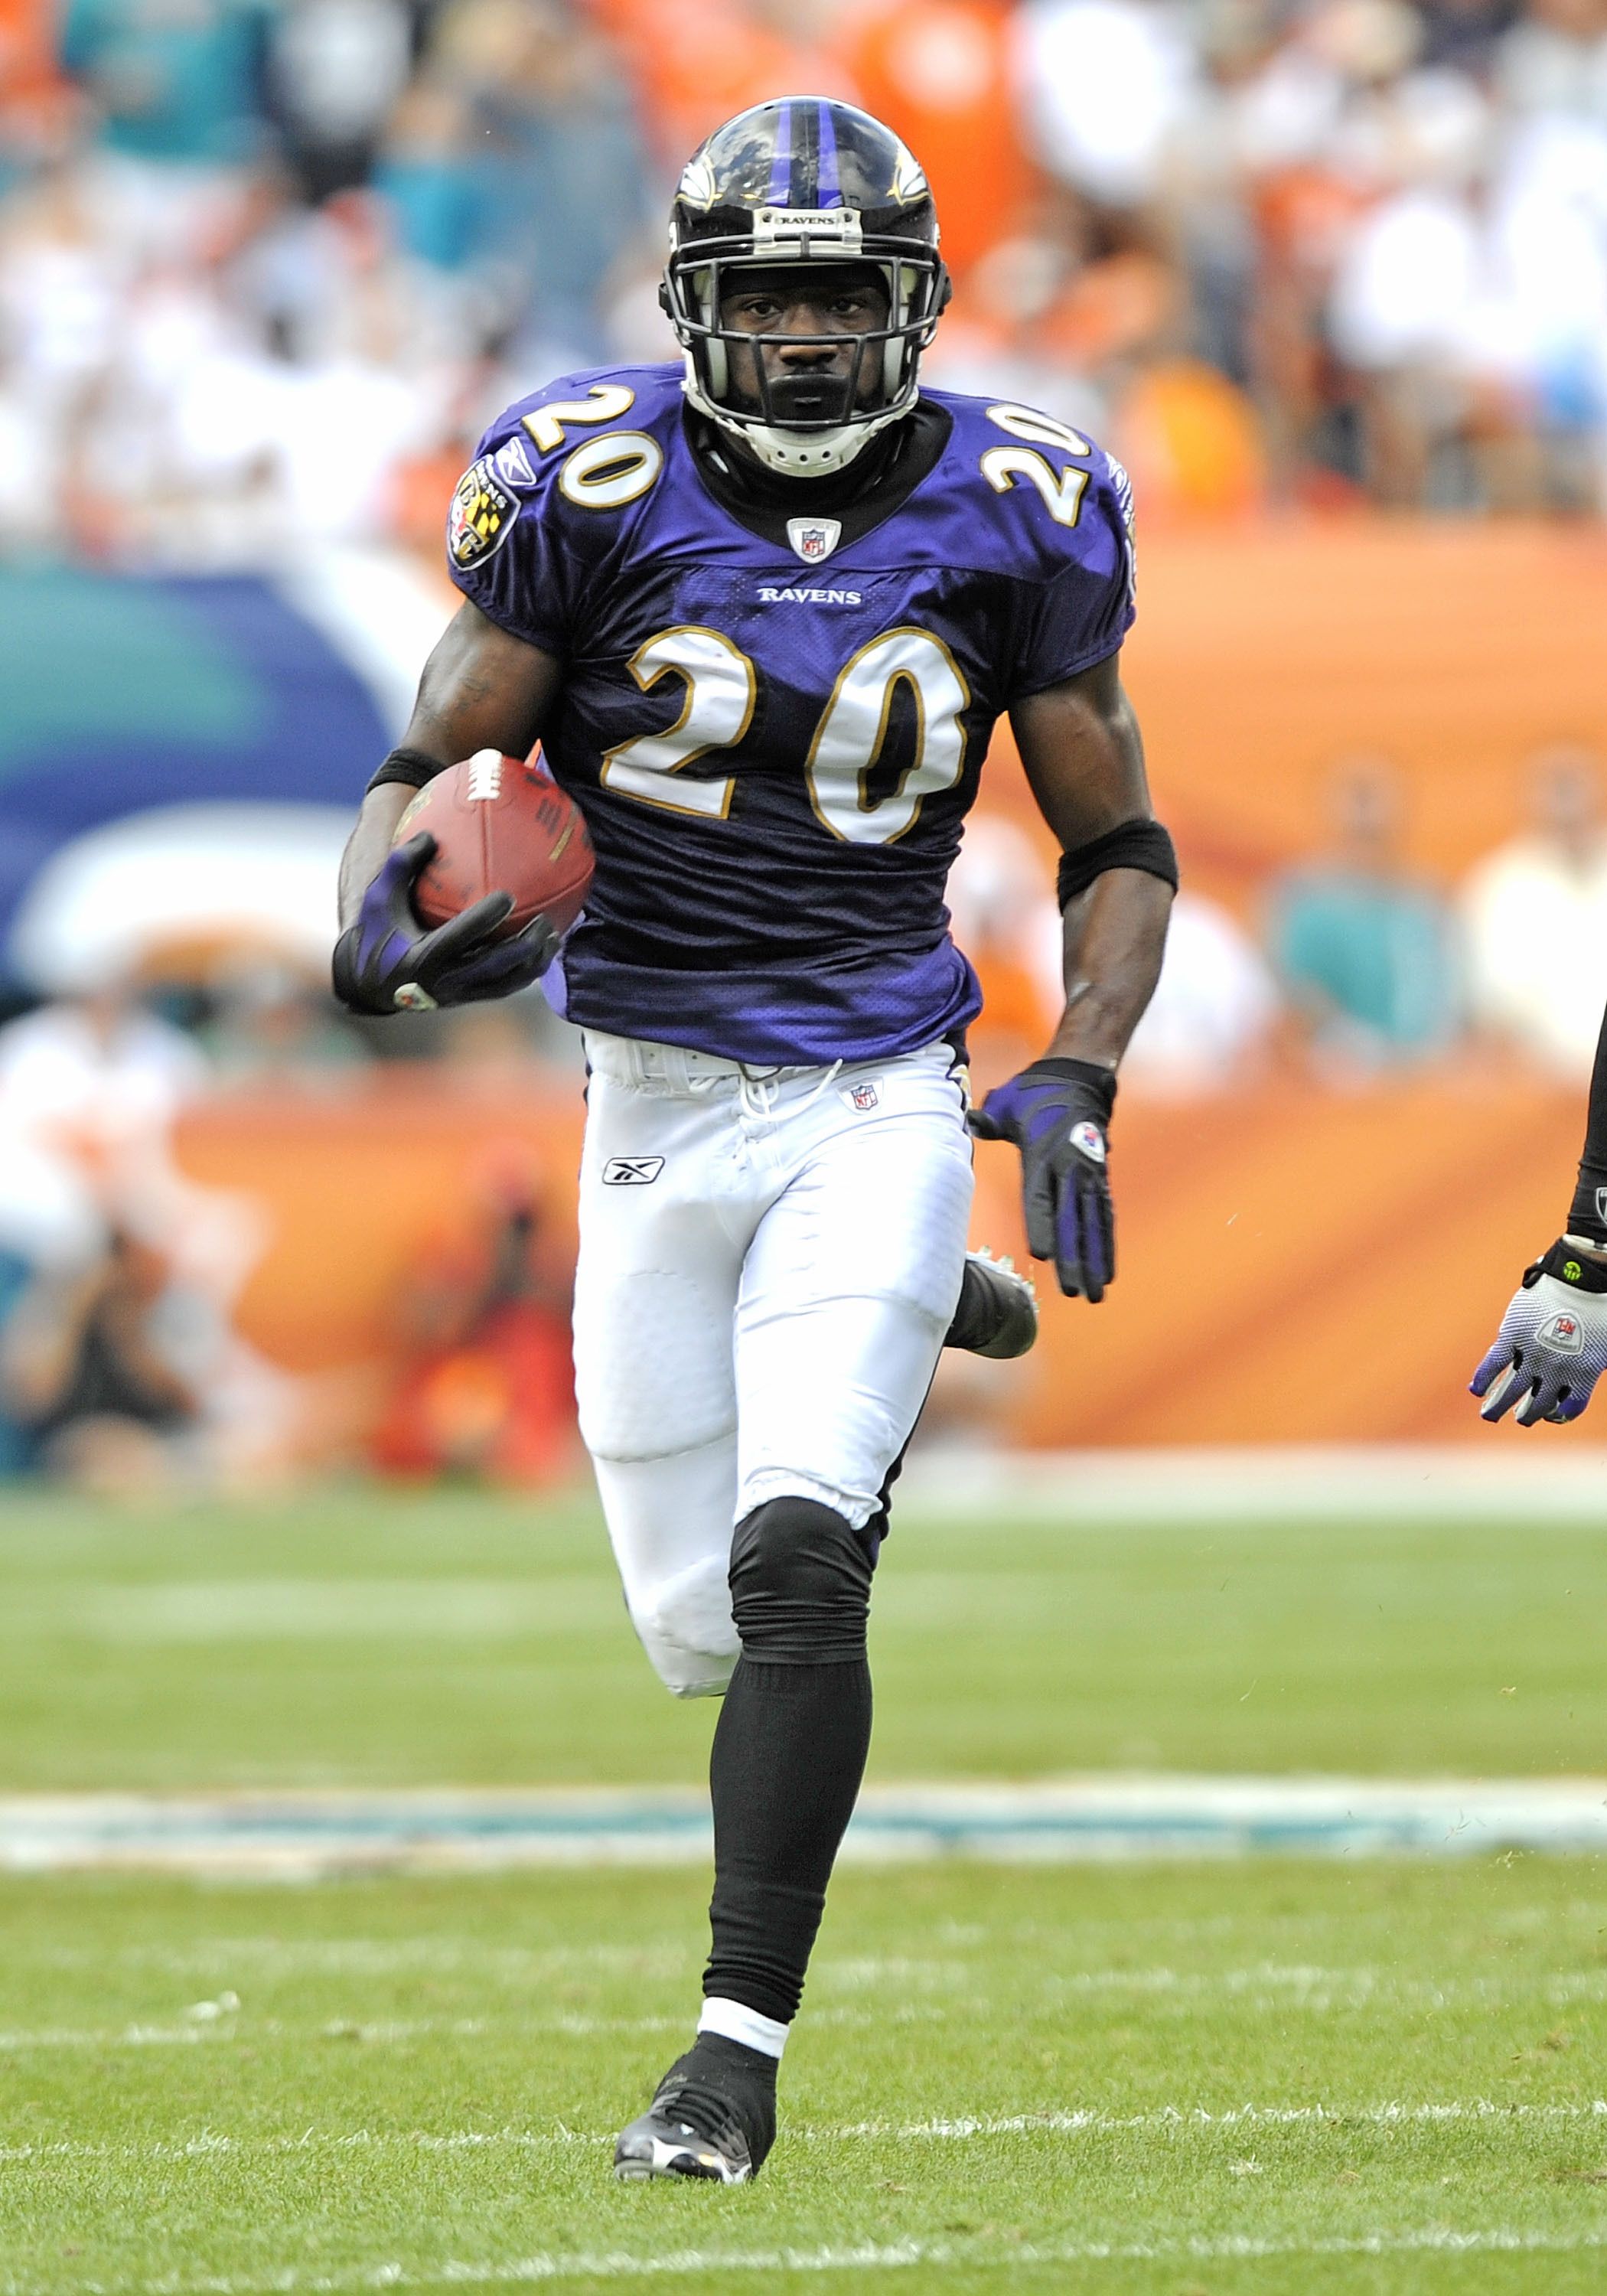 The Football 101: Ed Reed Was Every Quarterback's Worst Nightmare